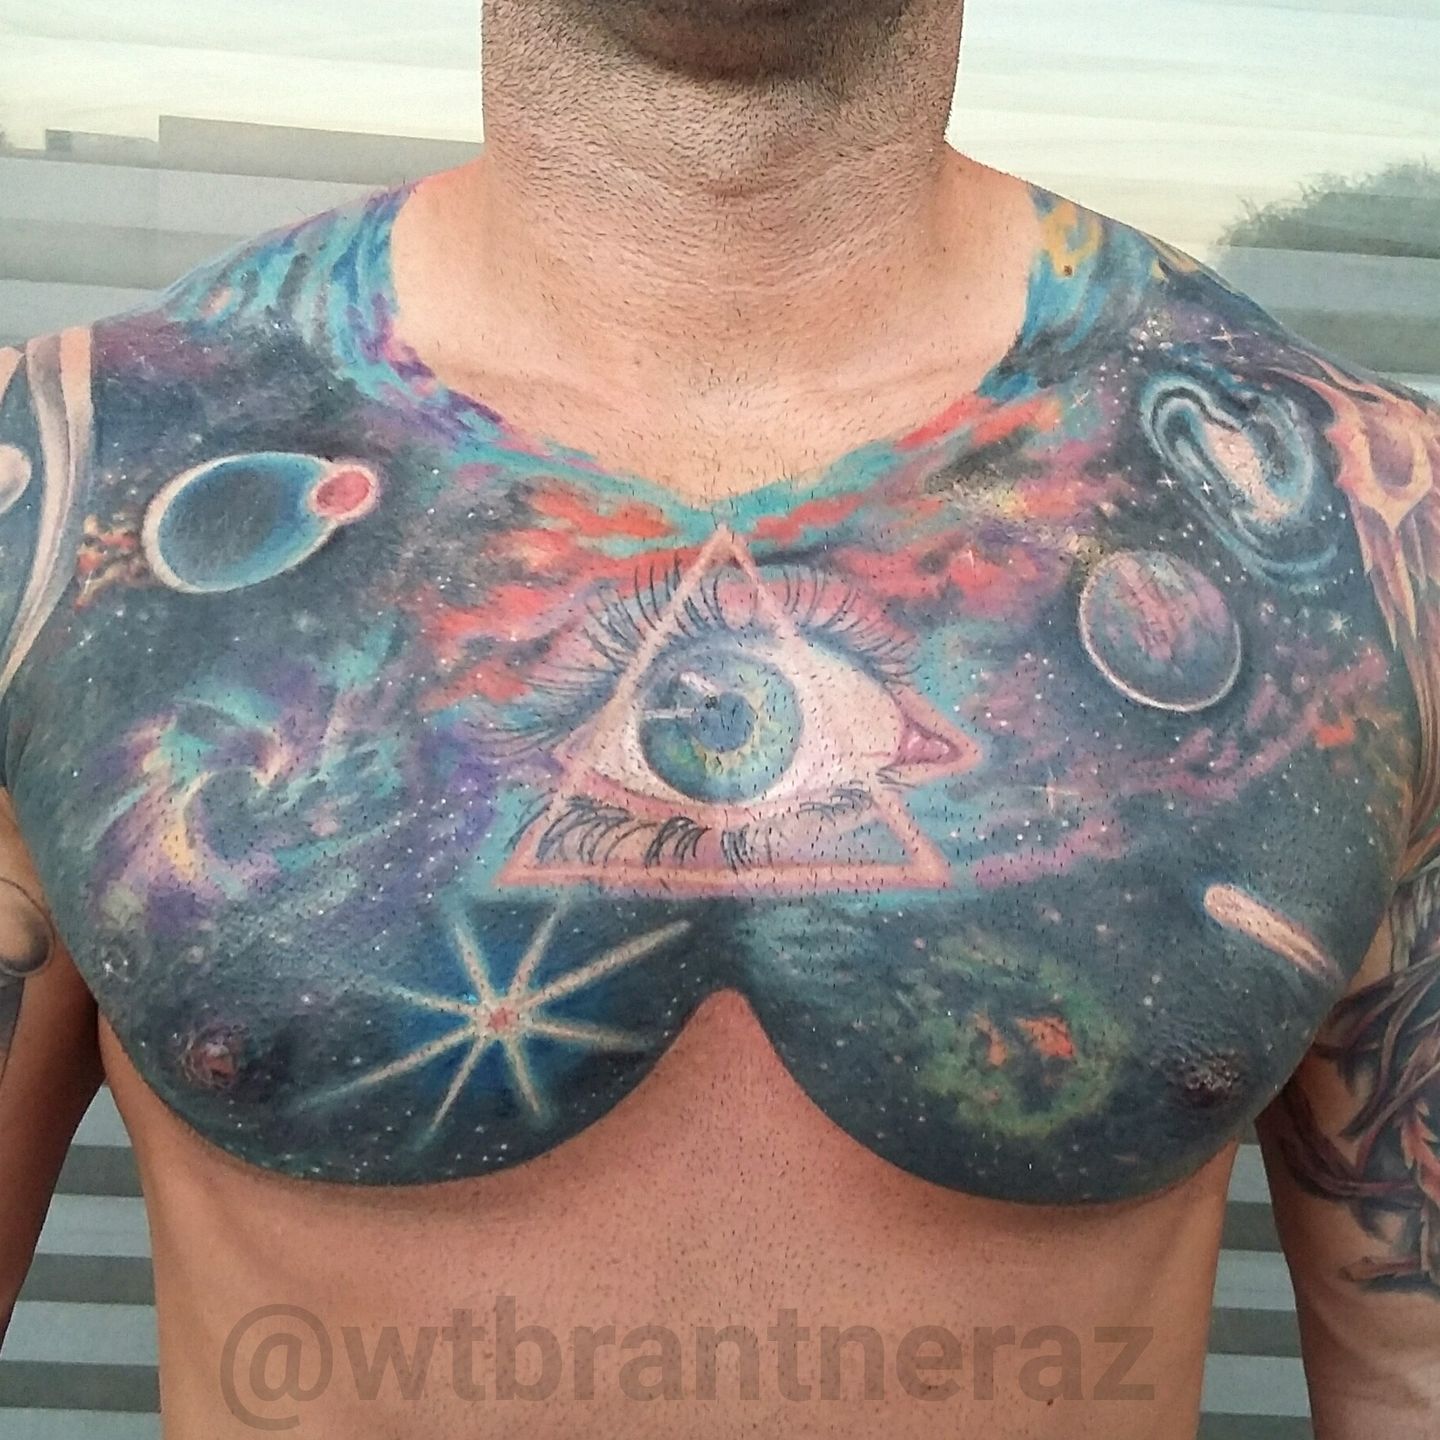 Tommybrantner The All Knowing Unknown Chest Piece Tattoo Outer Space Eye Chest Plate Space Tommy Brantner